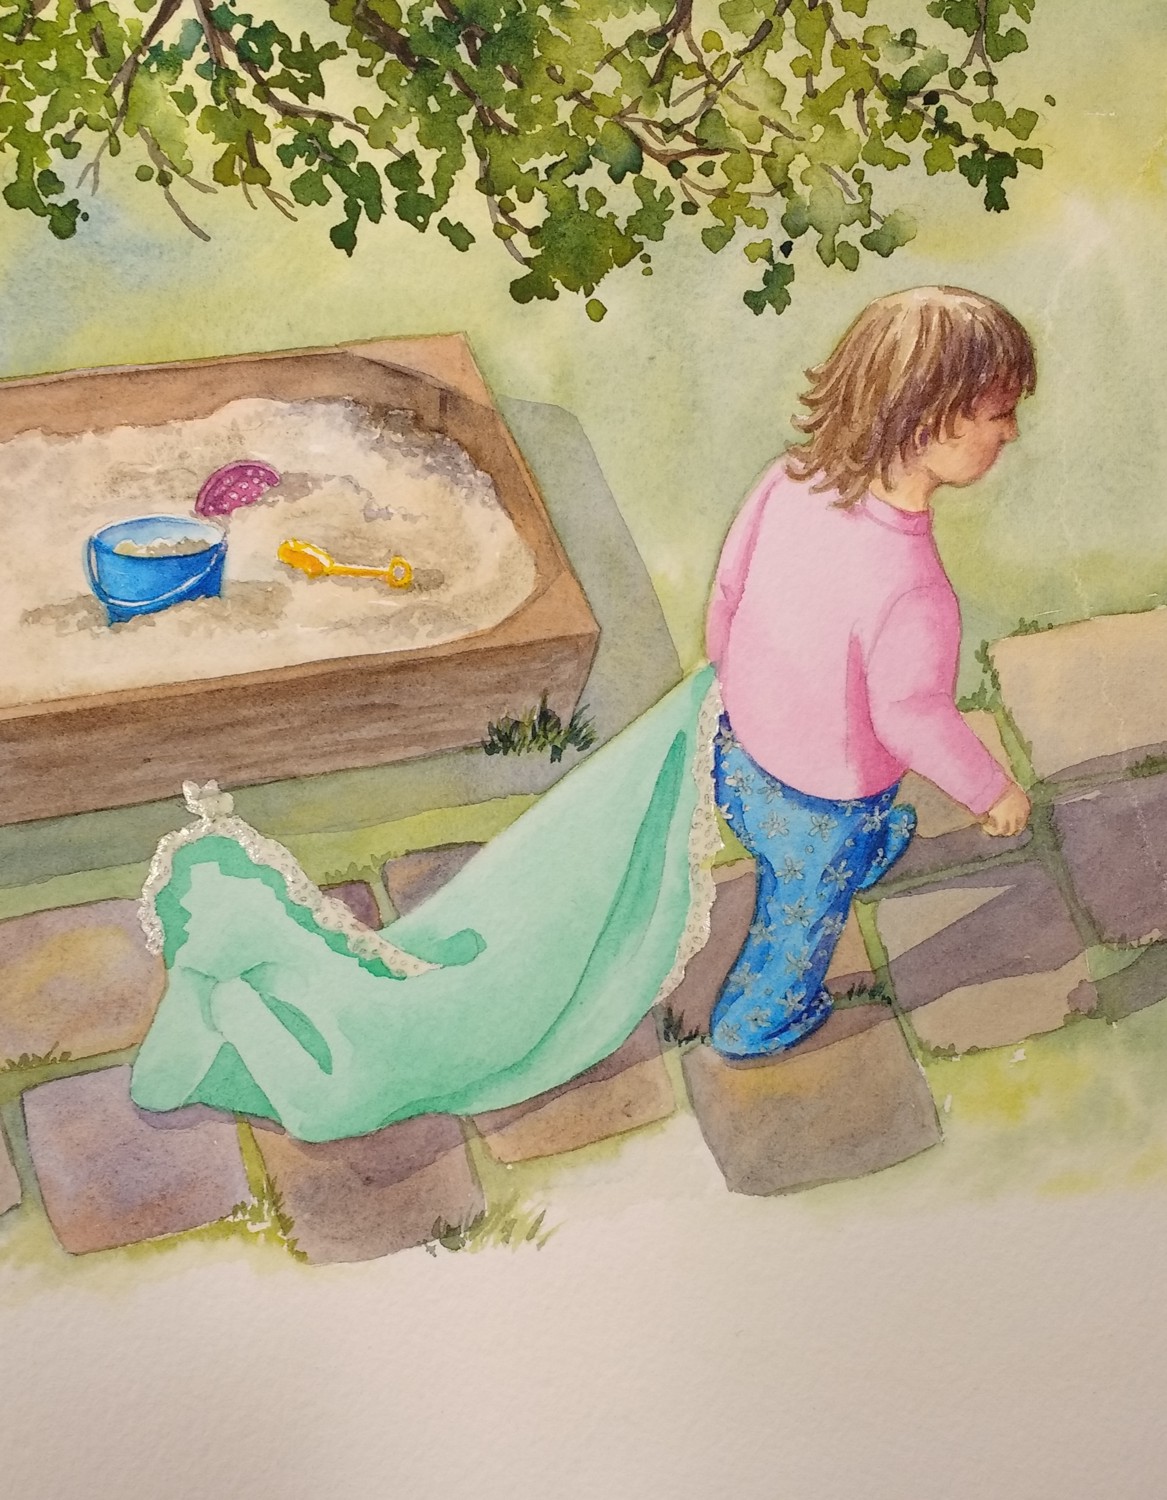 Watercolor Techniques For Creating Children's Book Illustrations